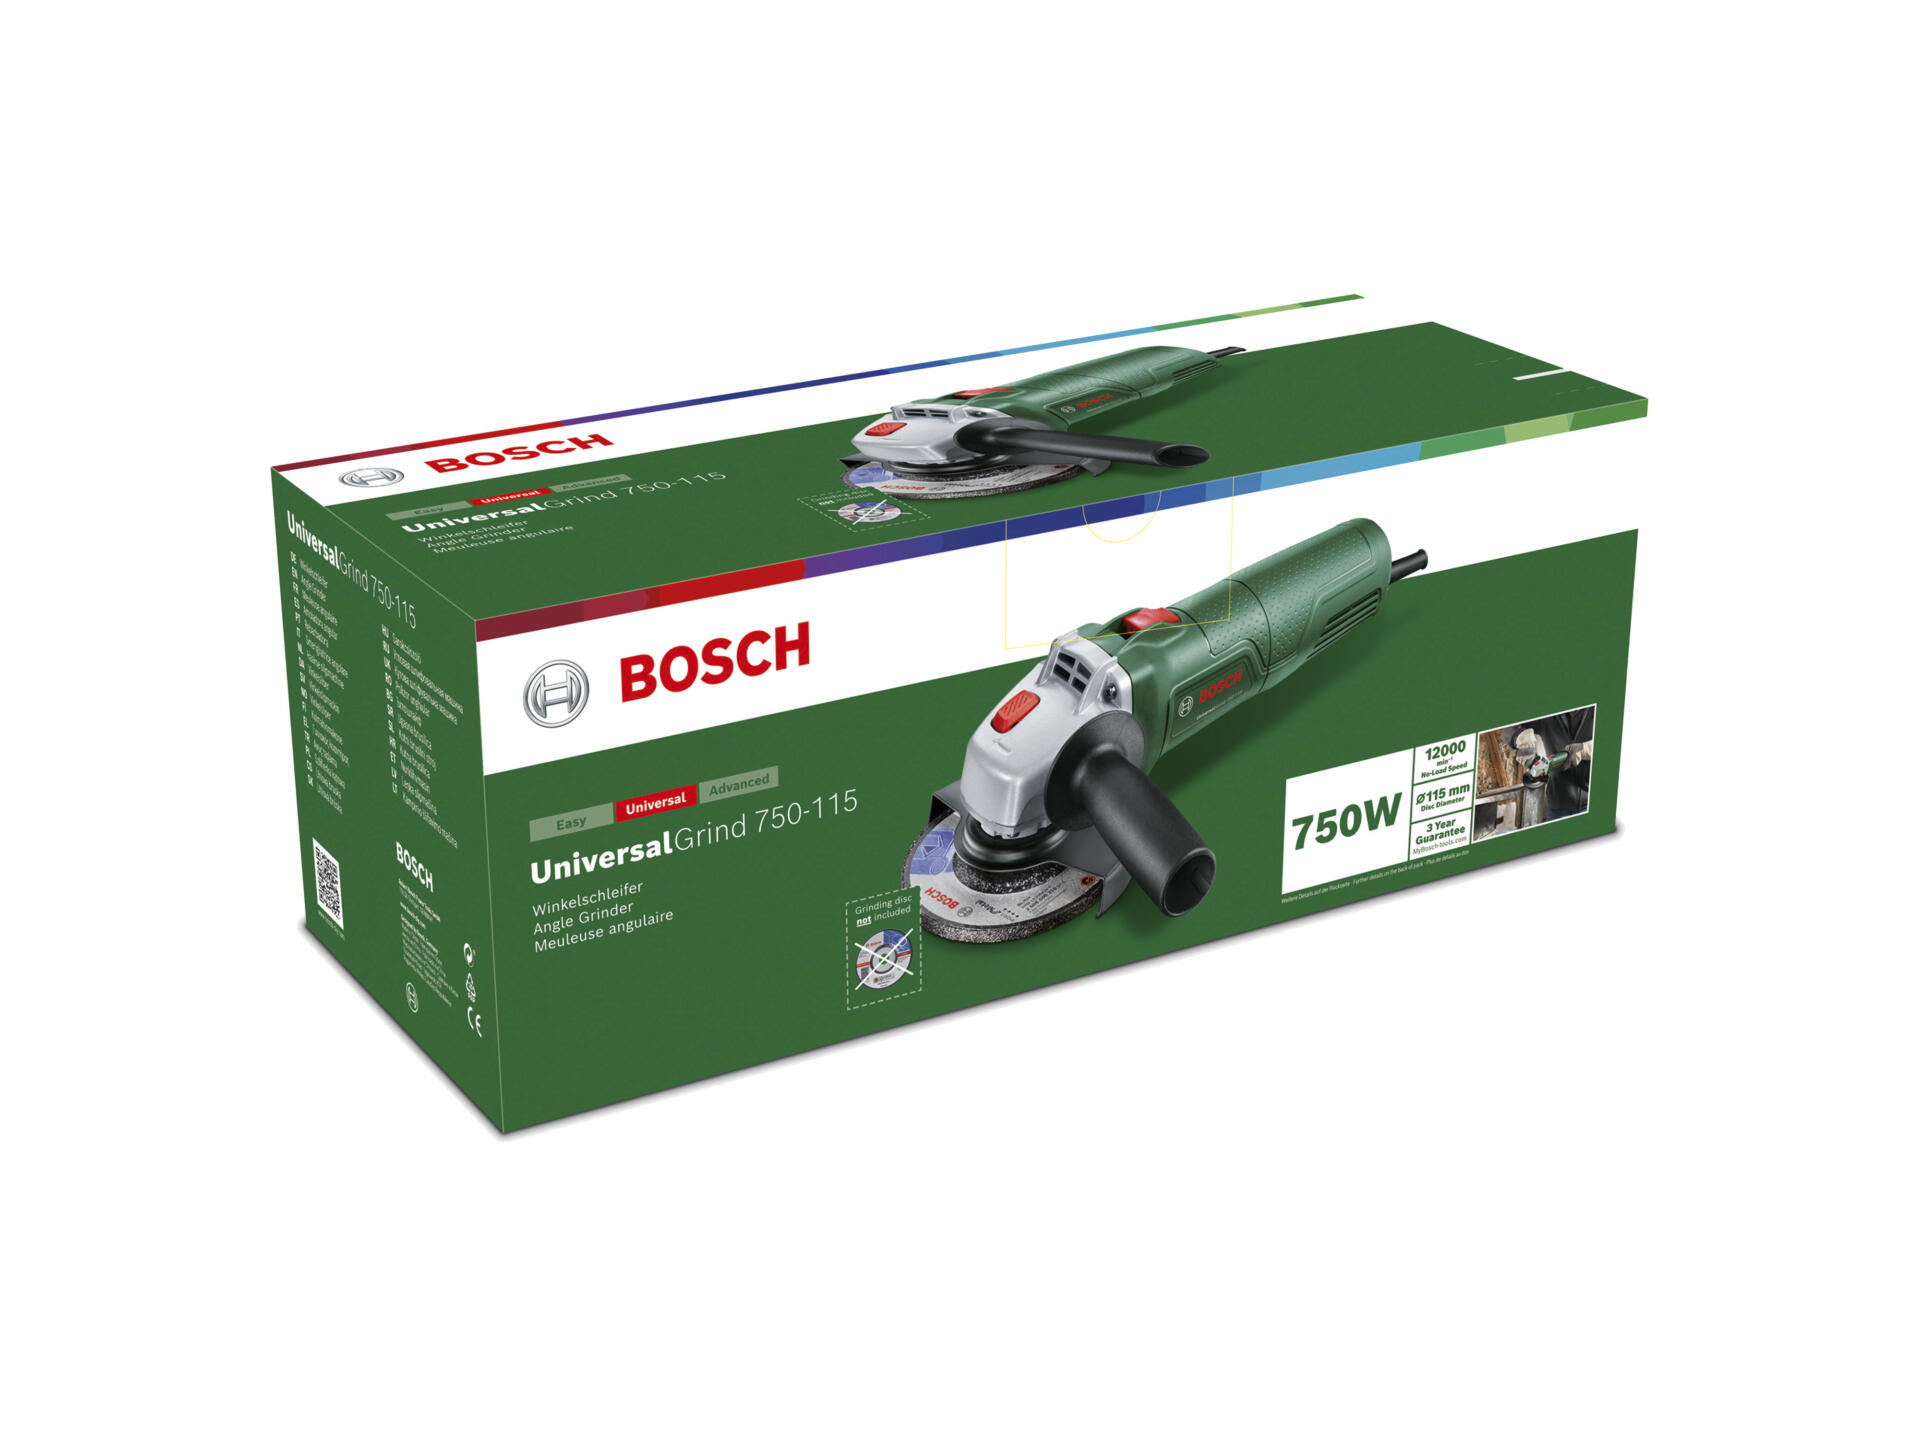 Bosch UniversalGrind 750-115 meuleuse angulaire 750W 115mm